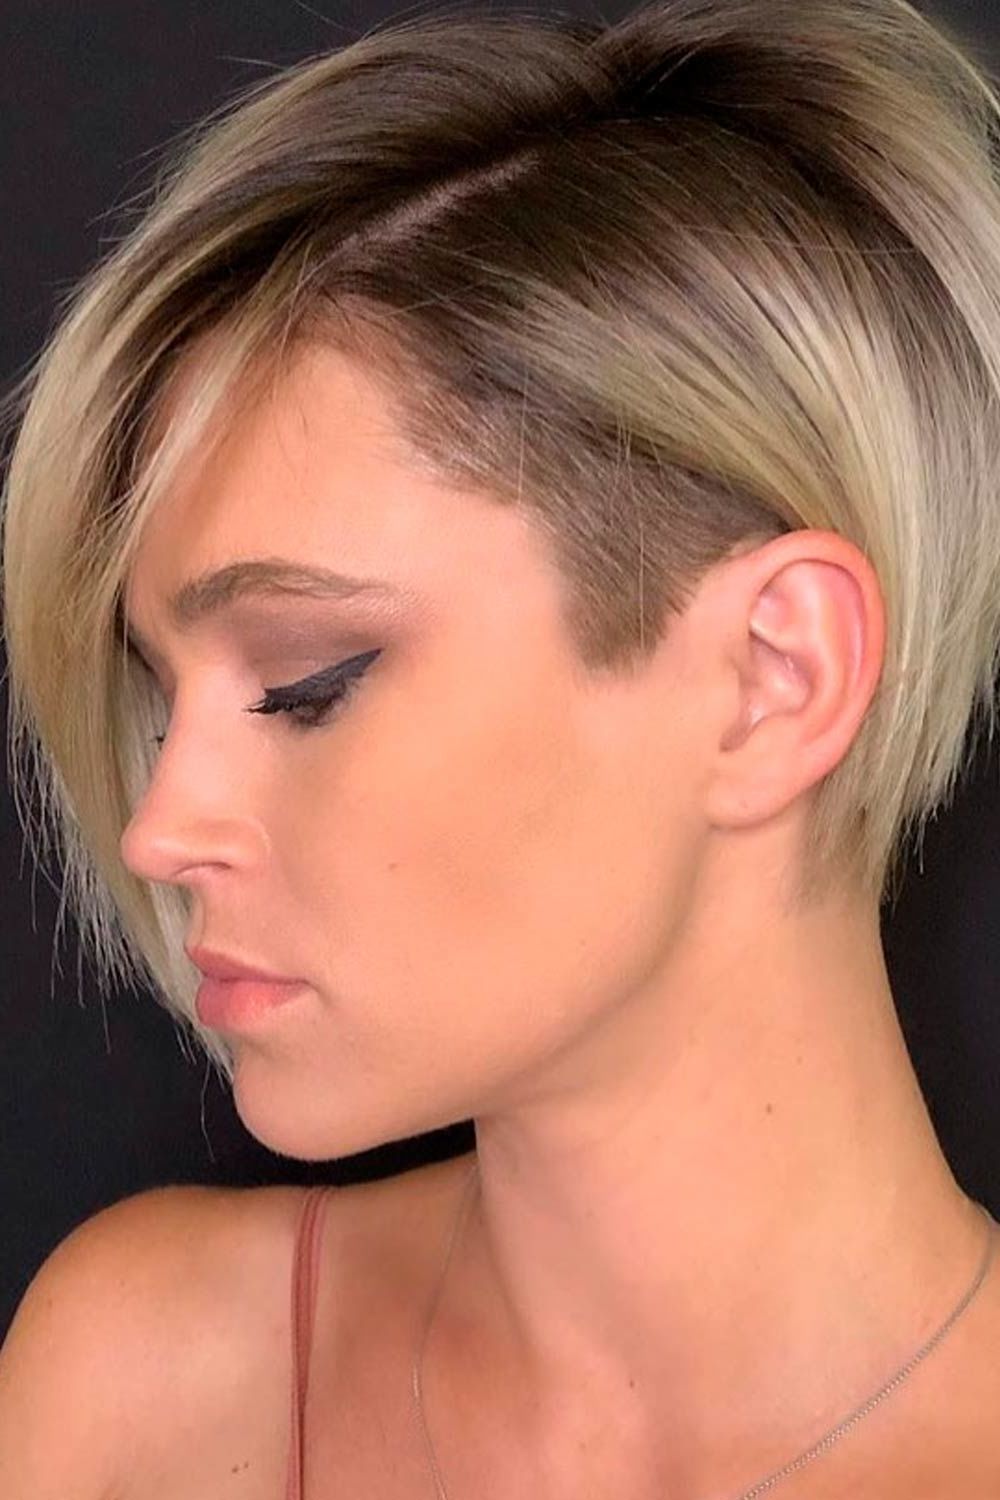 35+ Types Of Asymmetrical Pixie To Consider | Lovehairstyles Throughout Side Parted Pixie Hairstyles With An Undercut (View 12 of 25)